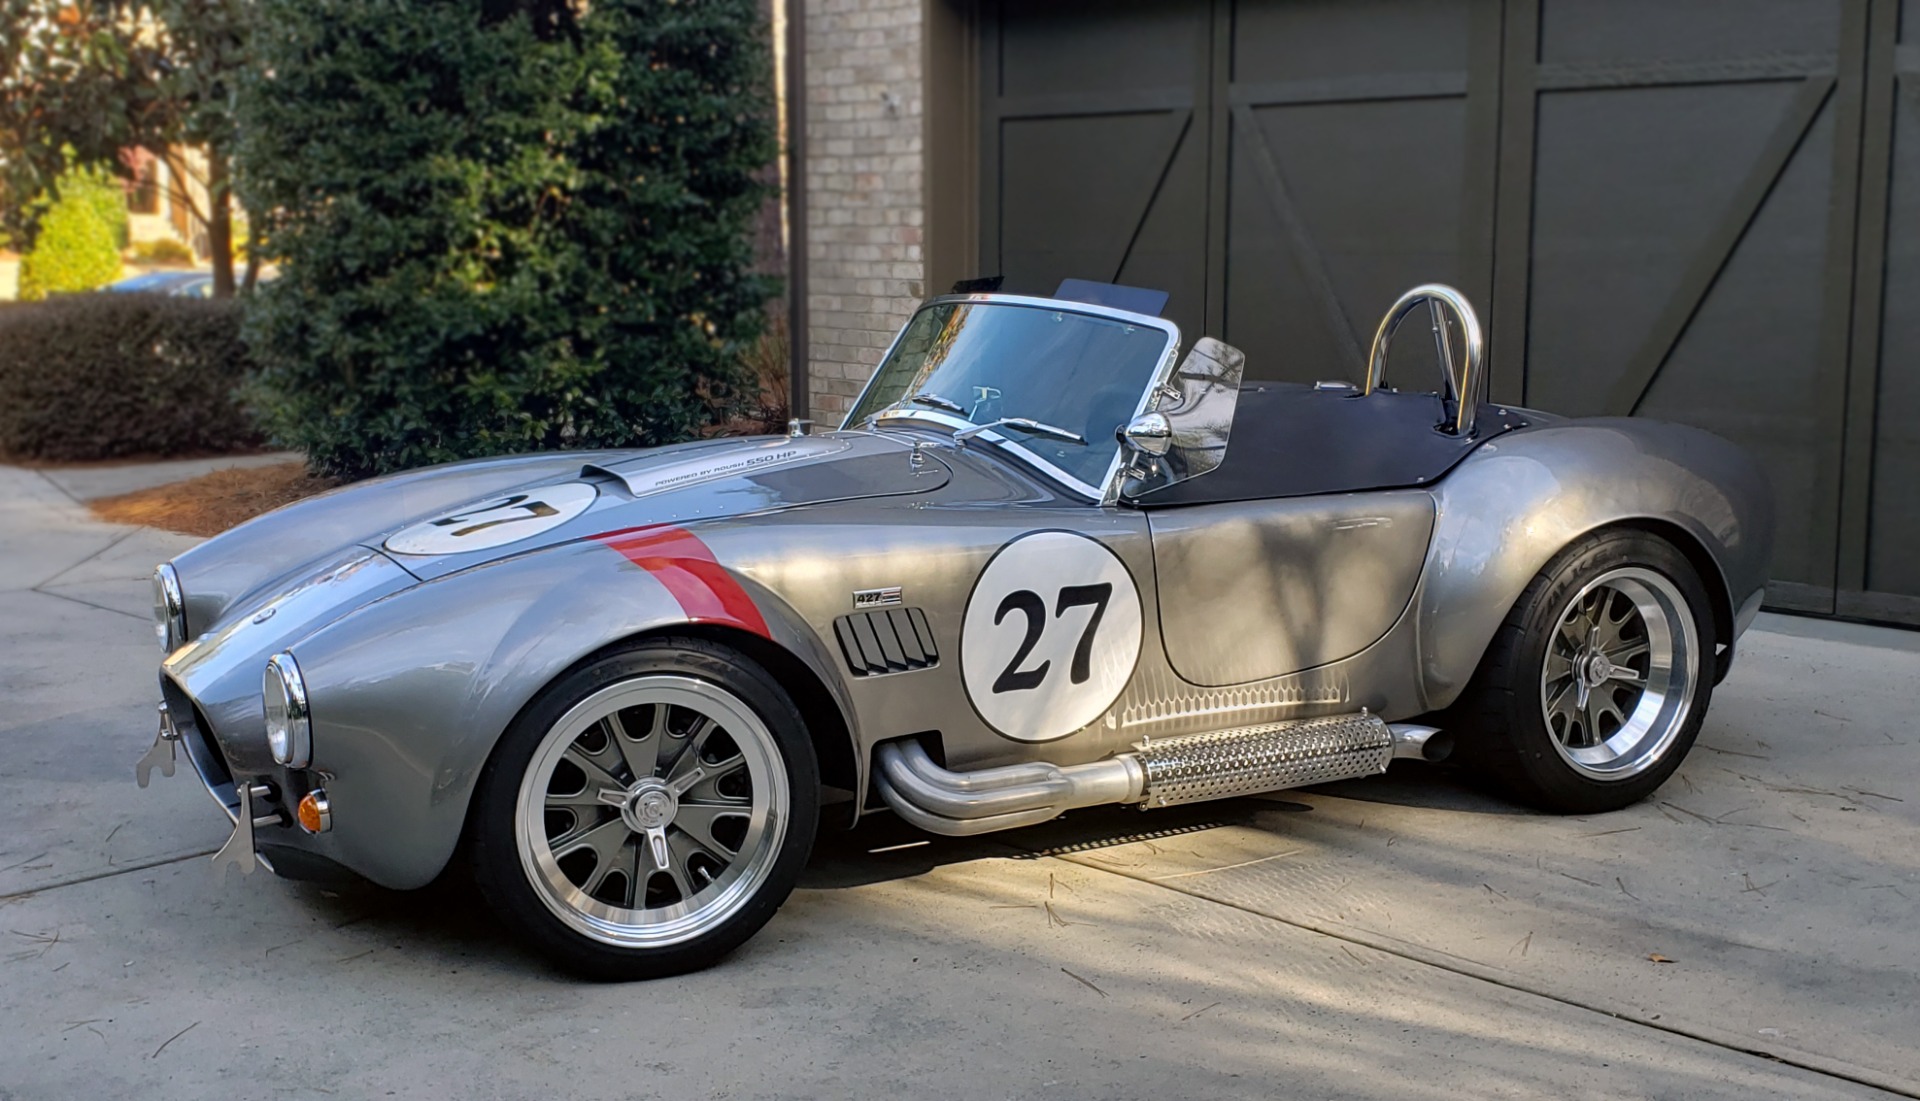 Used 1965 Ford COBRA 427 ROADSTER BY BACKDRAFT RACING ROUSH 553HP V8 / TREMEC 6-SPD / PWR STRNG for sale Sold at Formula Imports in Charlotte NC 28227 7